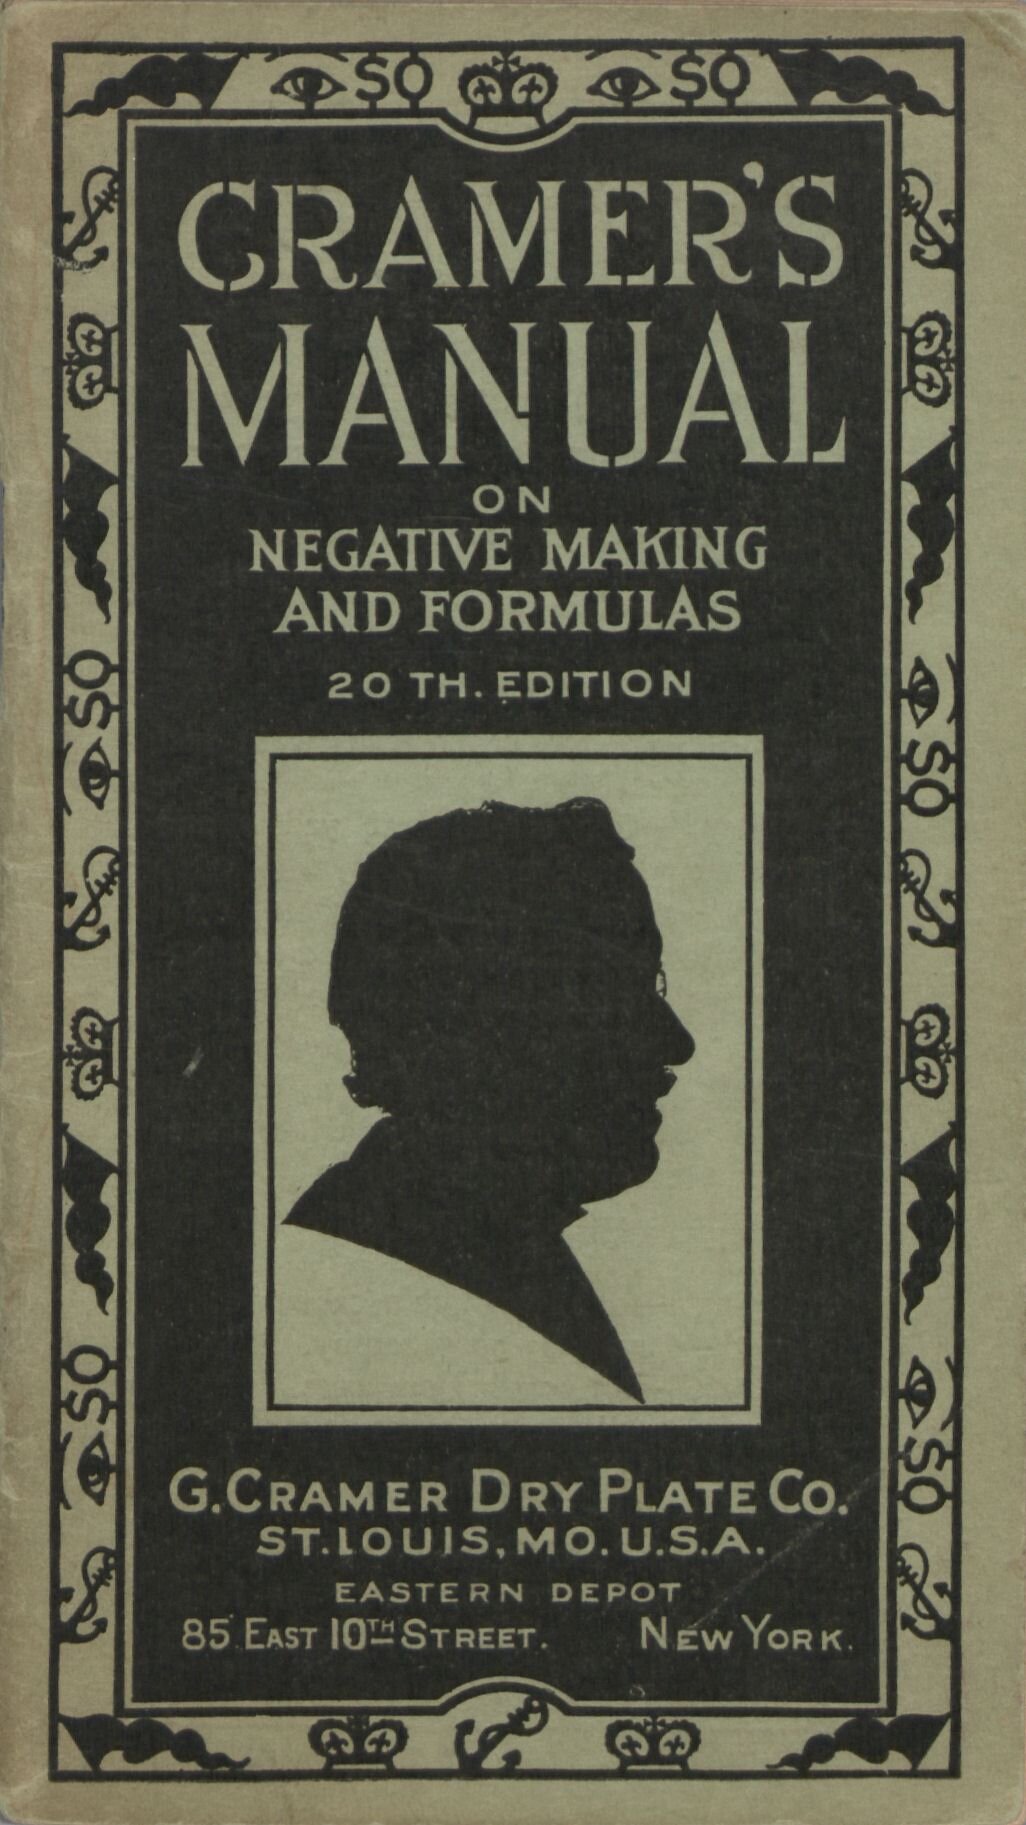     Cramer's Manual on Negative Making and Formulas    &nbsp;(St. Louis, MO: G. Cramer Dry Plate Co., 1912).  